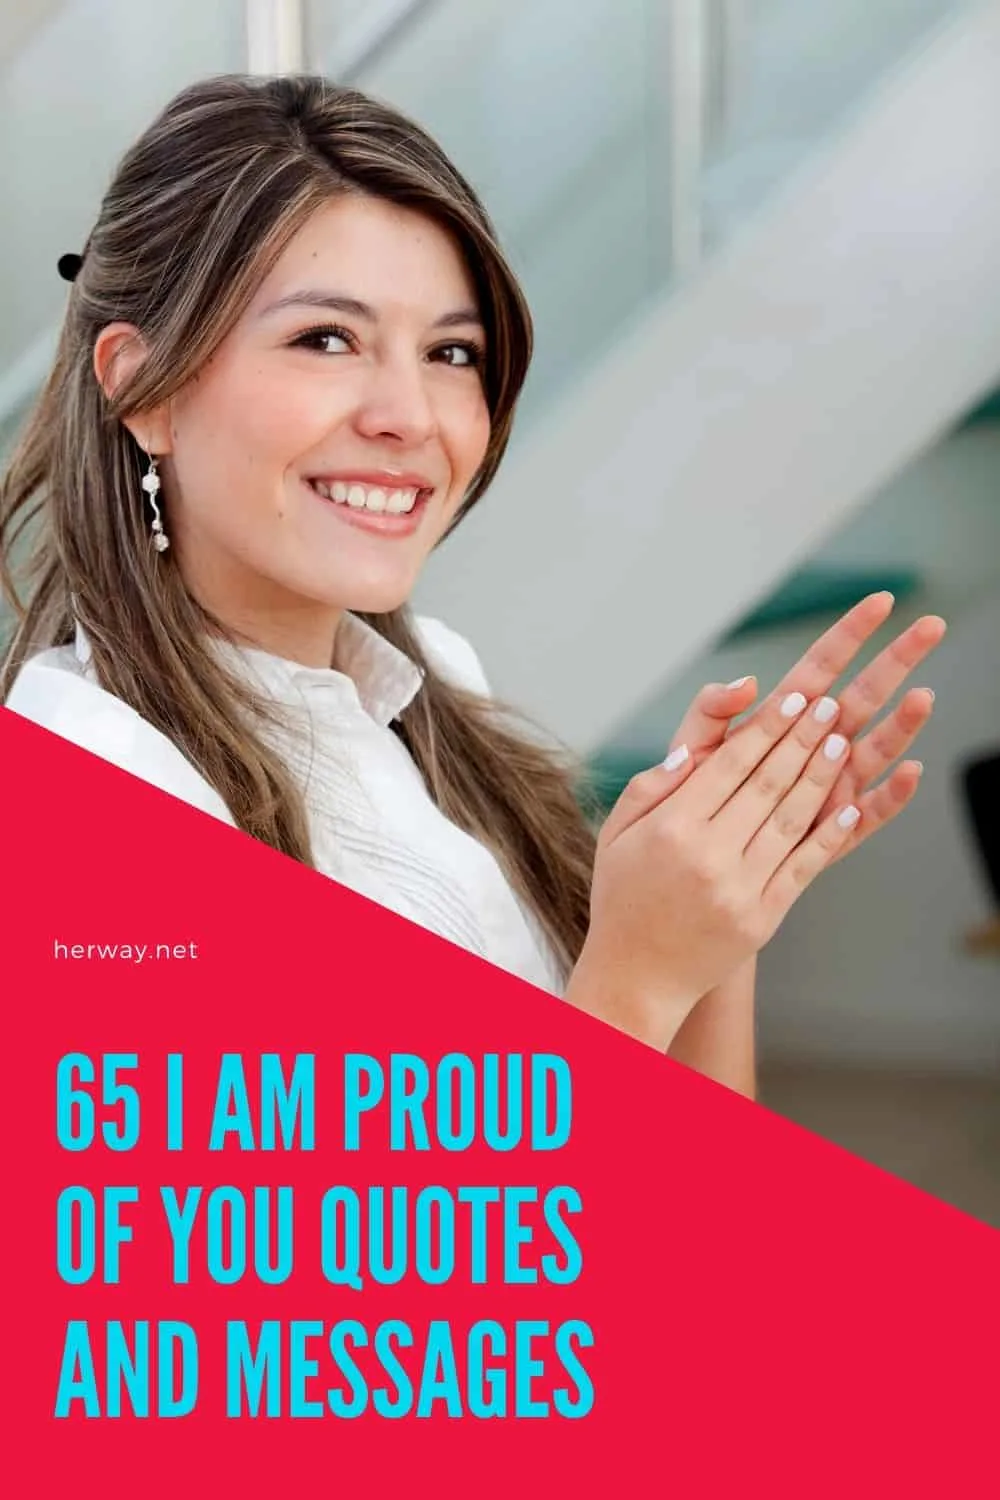 65 I Am Proud Of You Quotes And Messages